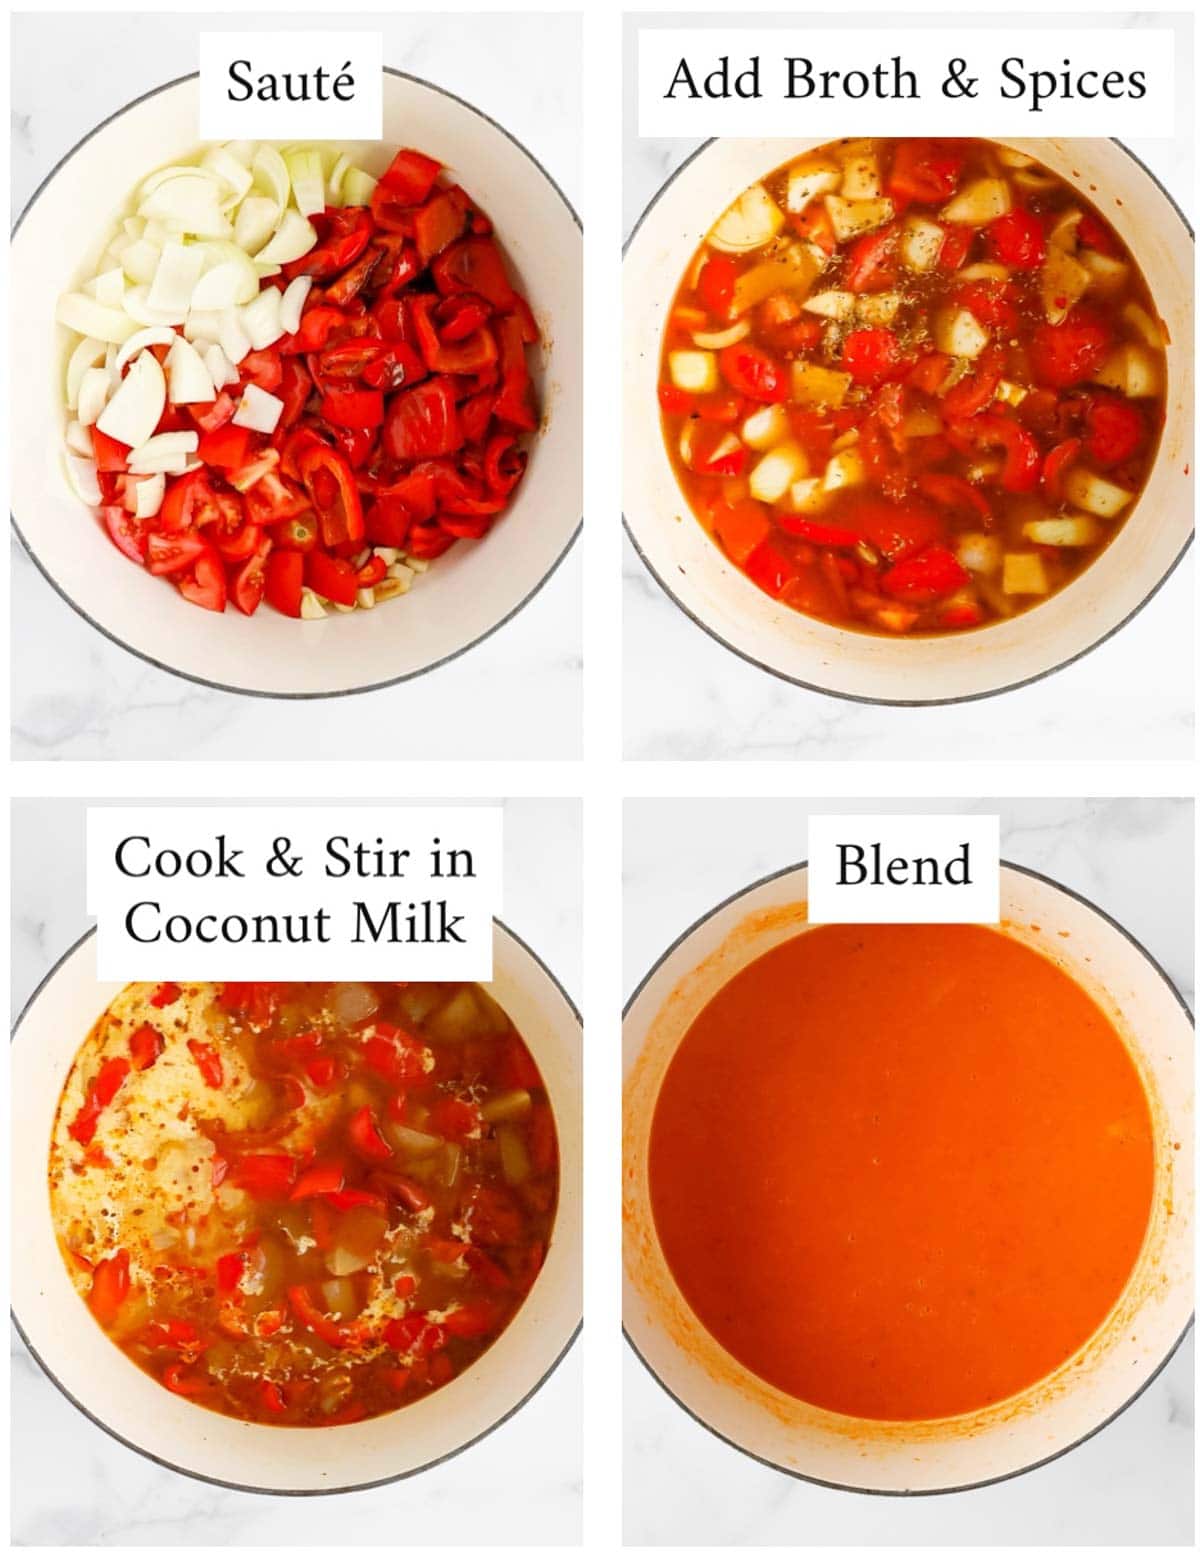 4 images in a collage with different stages of making soup. 1: "saute" the white pot is filled with uncooked onion, peppers, and tomatoes, 2: "add broth and spices", the picture has cooked vegetables, broth, and spices in the pot. 3: "cook & stir in coconut milk", the pot has cooked ingredients and coconut milk has been poured into the broth and vegetables. 4: "blend" the soup is a creamy, smooth, blended red liquid.